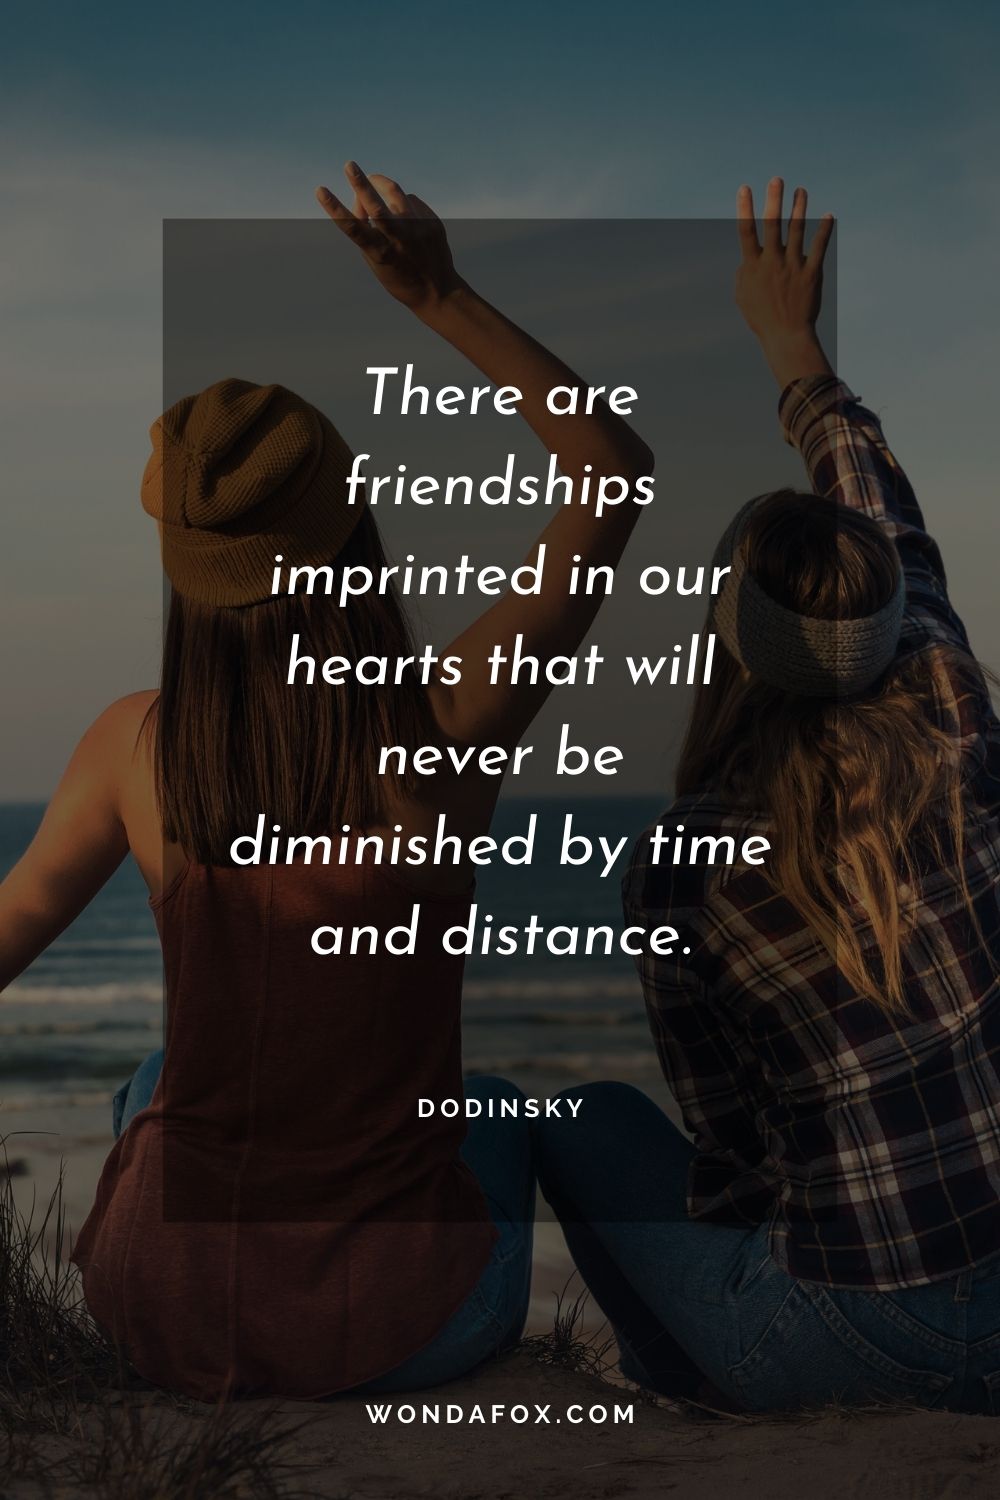 There are friendships imprinted in our hearts that will never be diminished by time and distance.